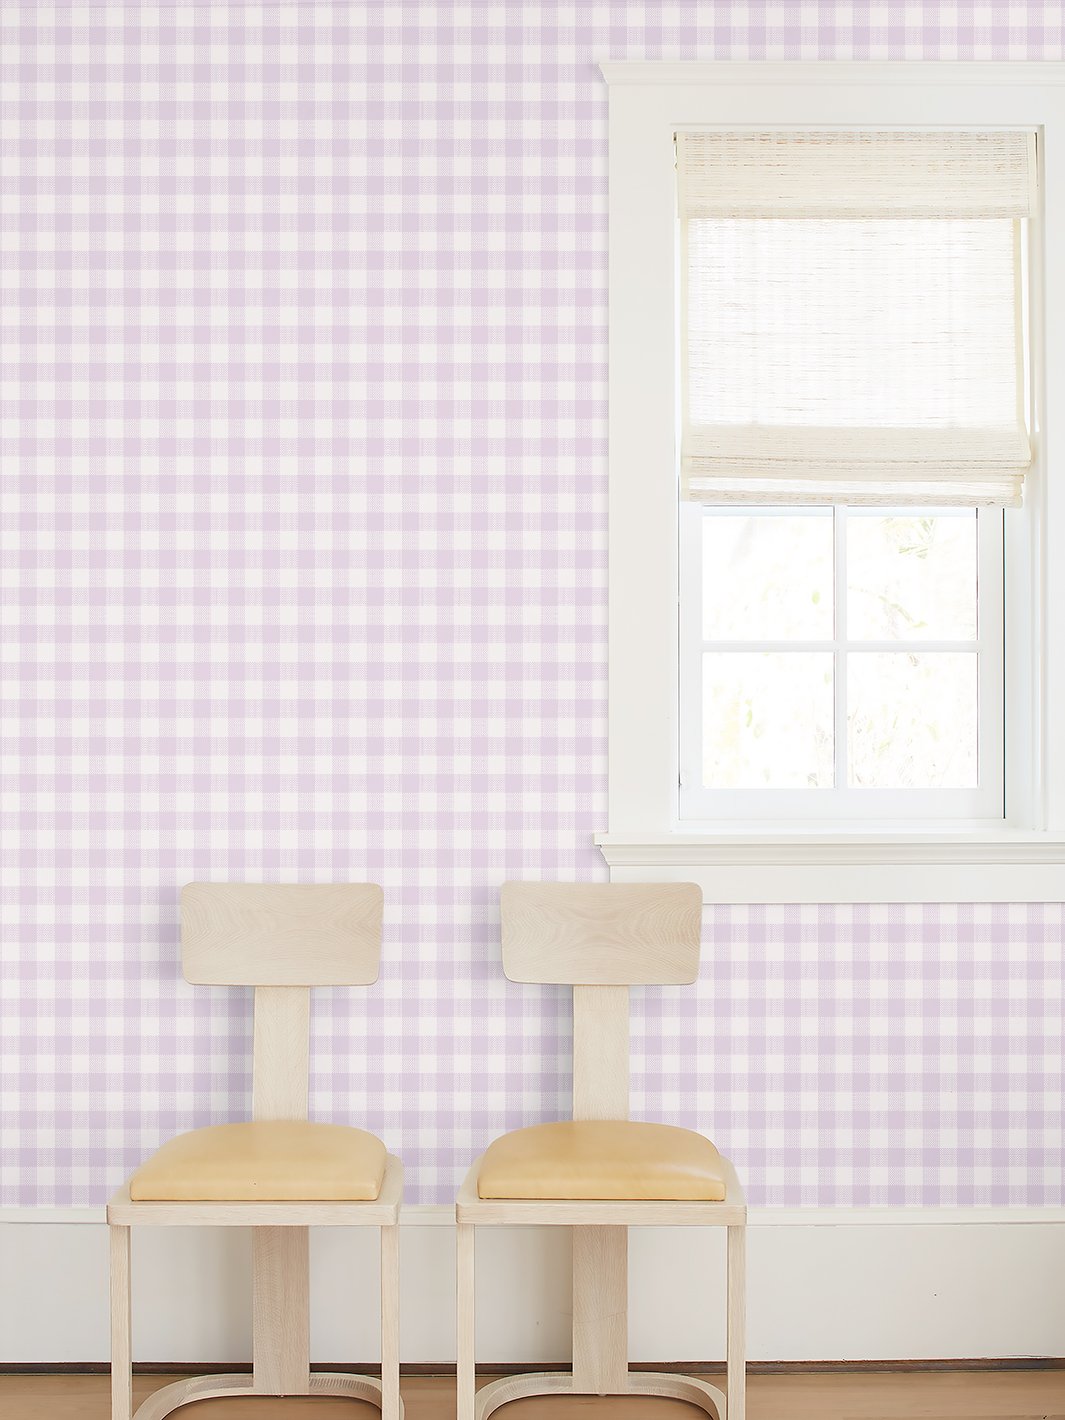 Pink Gingham Wallpaper Peel and Stick Wallpaper Removable for Interior  Design Pink Checkered Removable Wallpaper Pink Cute 